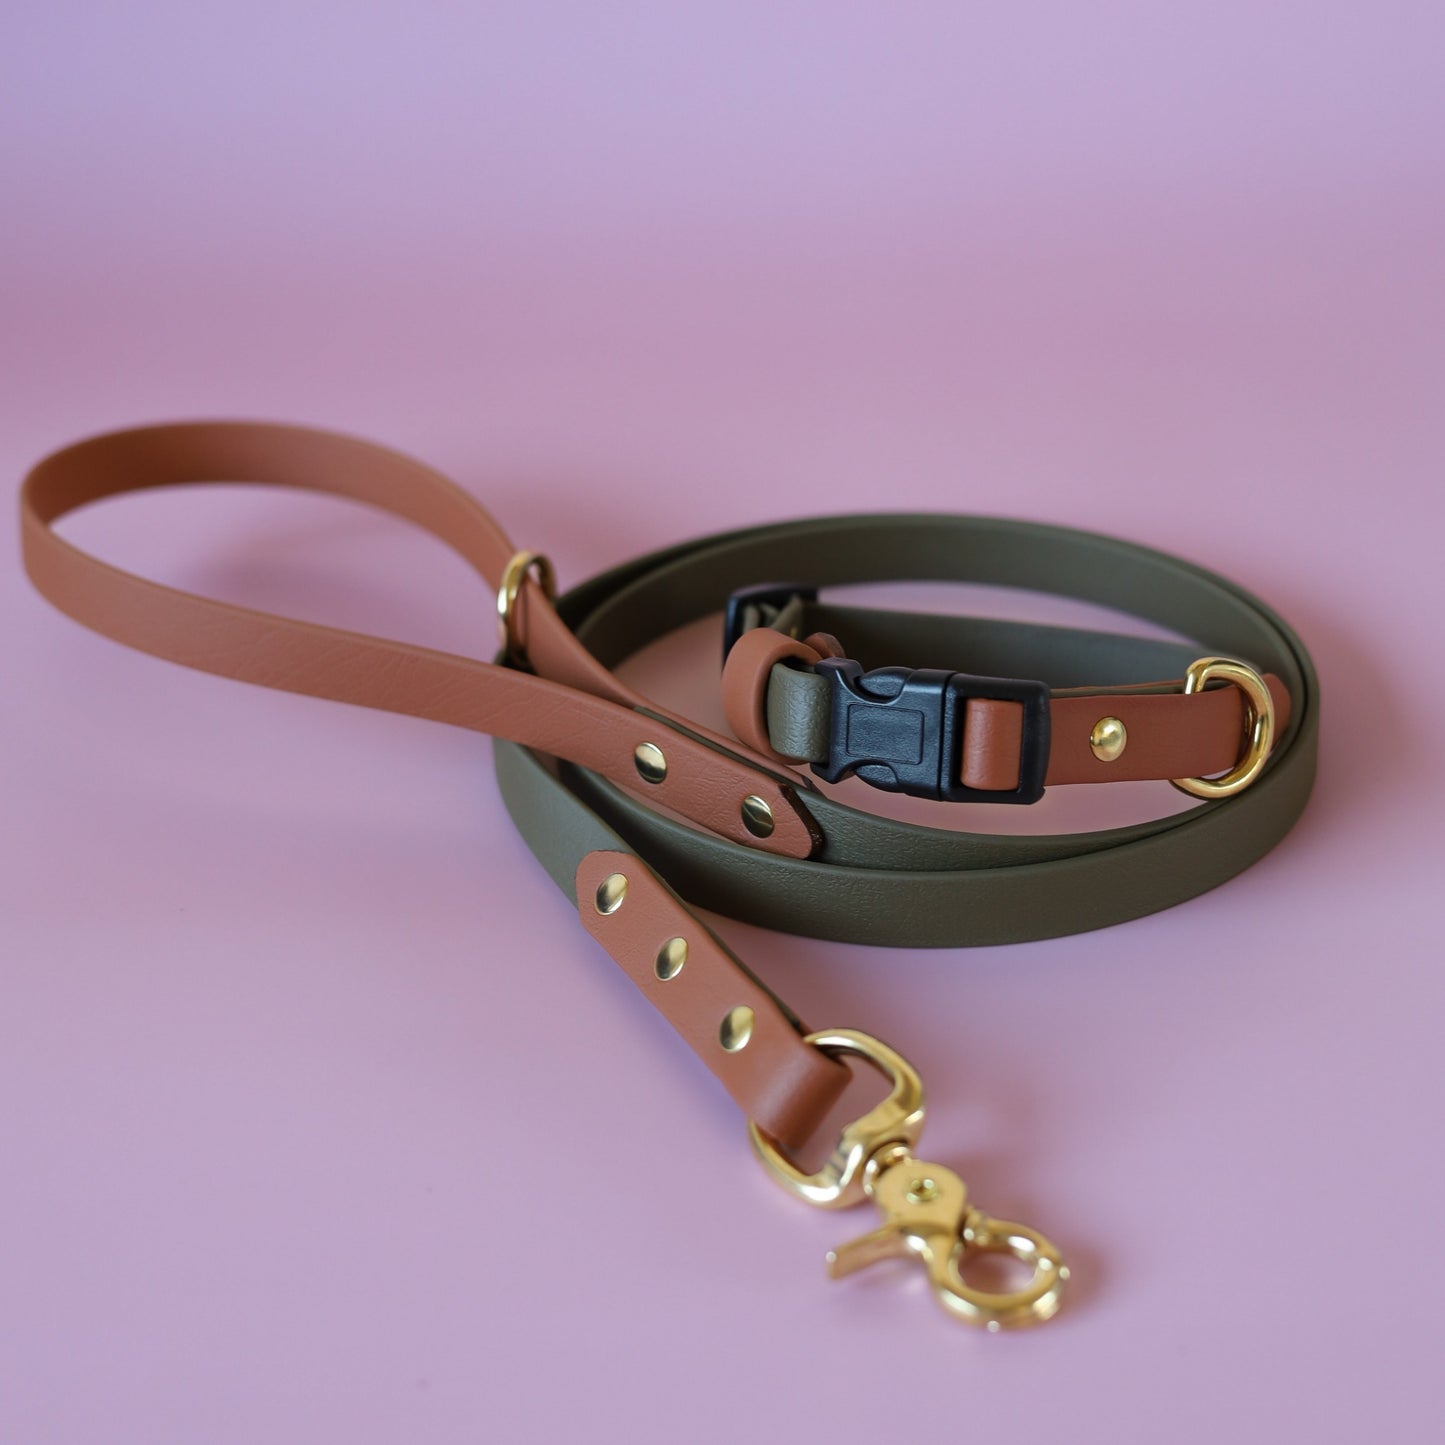 Design your own two toned leash